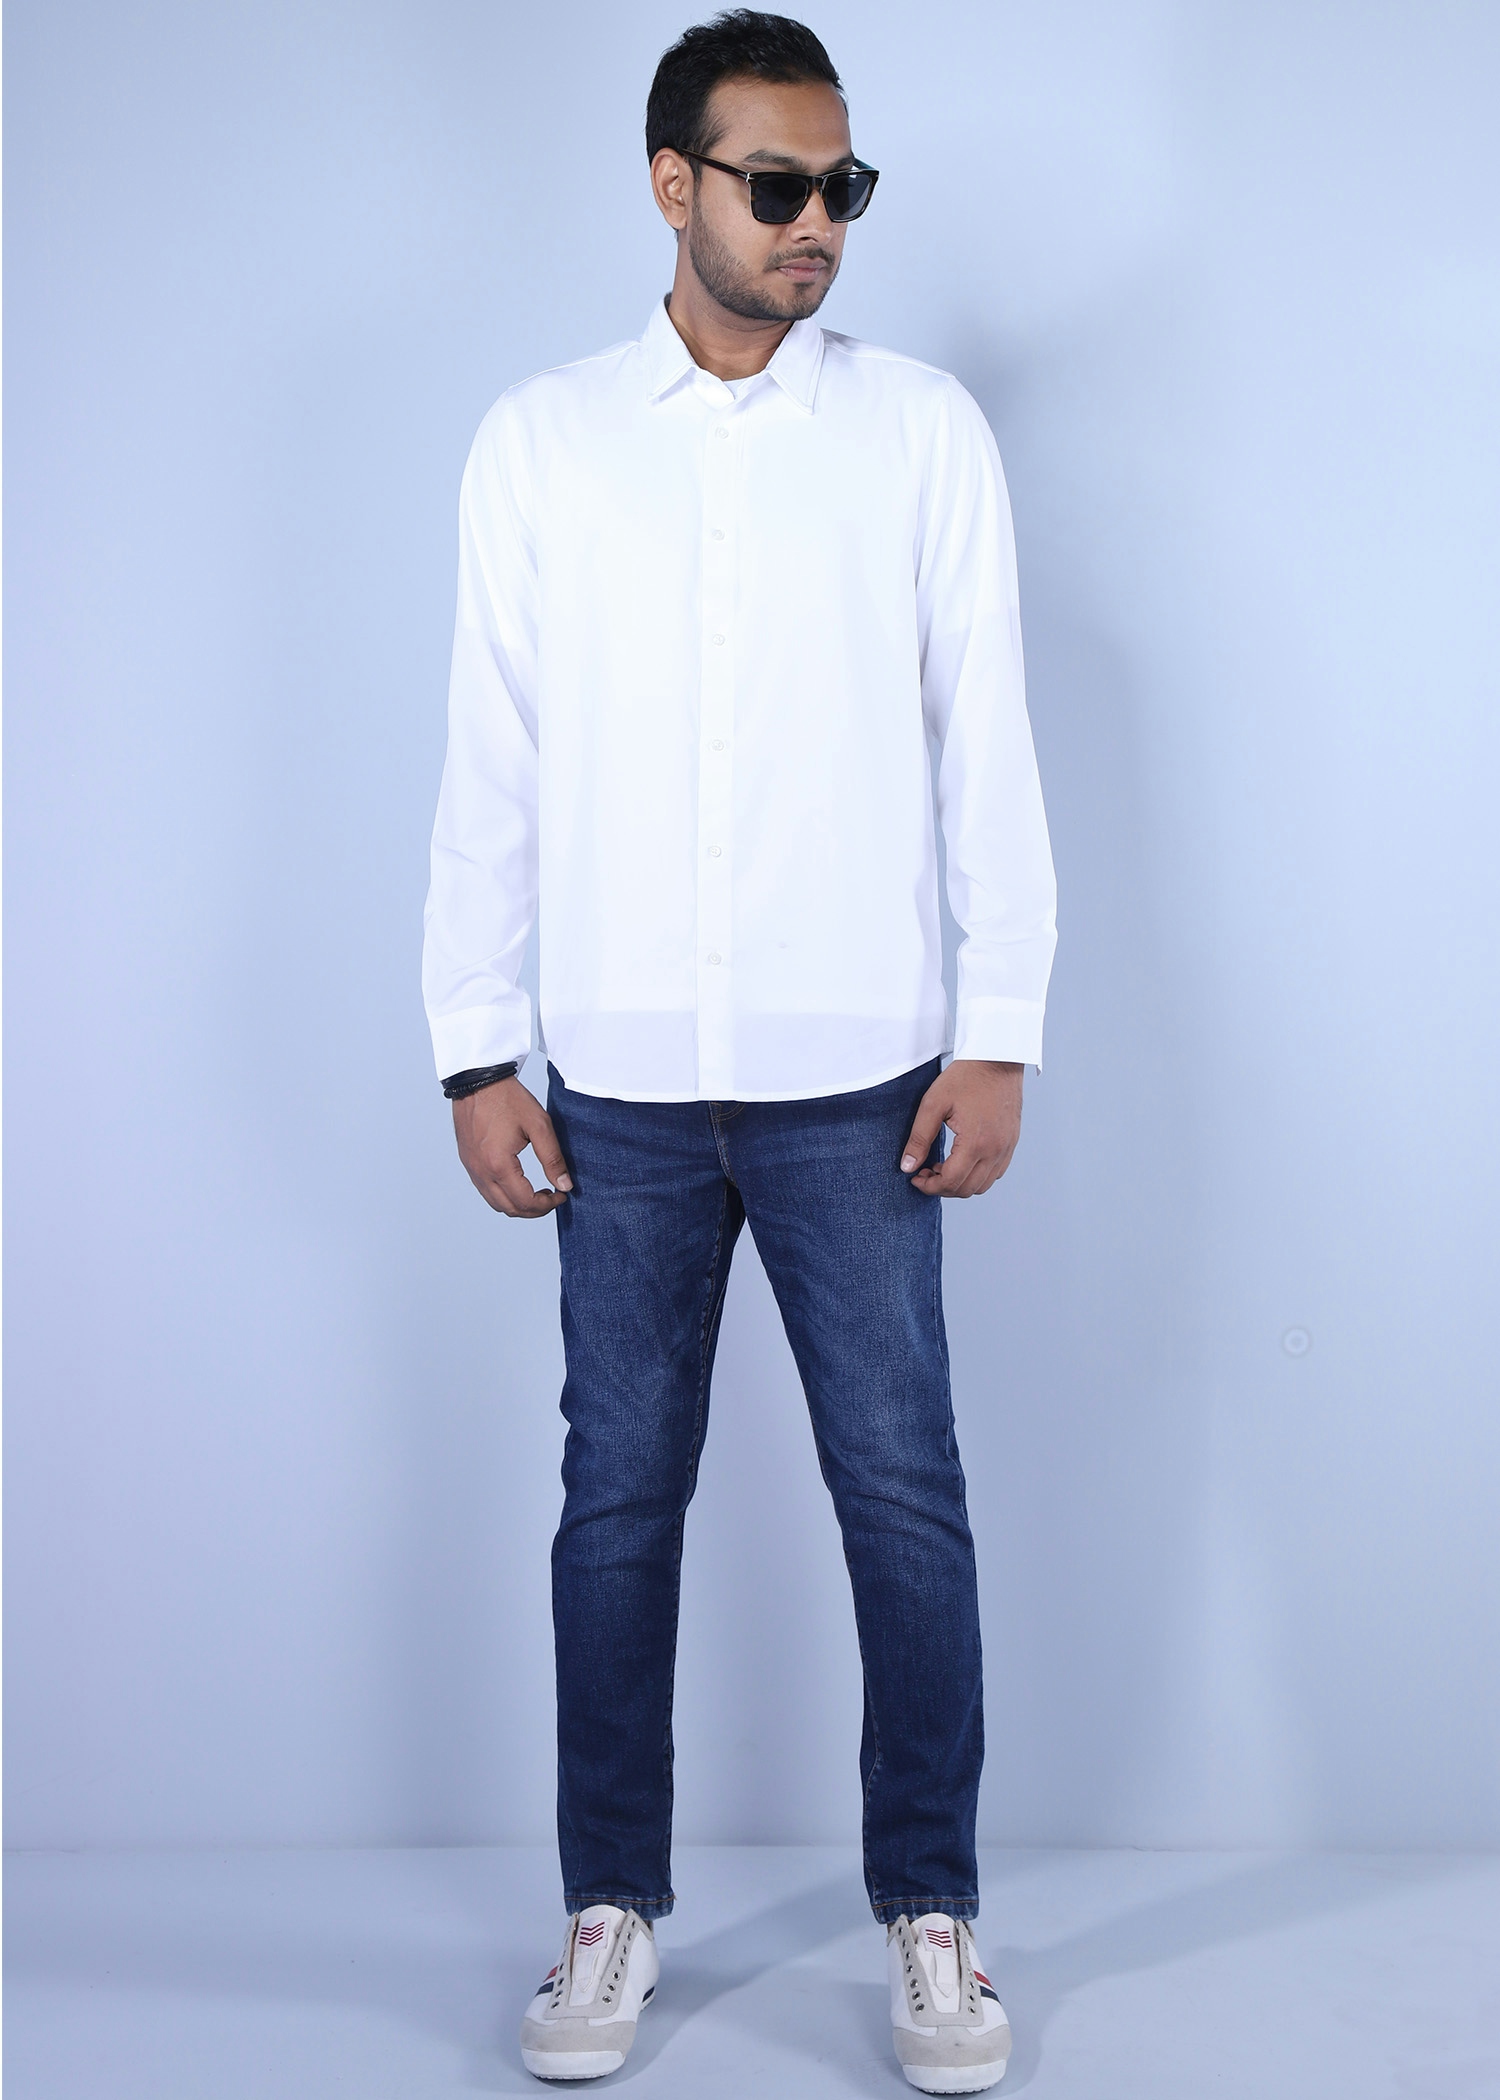 istanbul xxiv fs shirt white color full front view